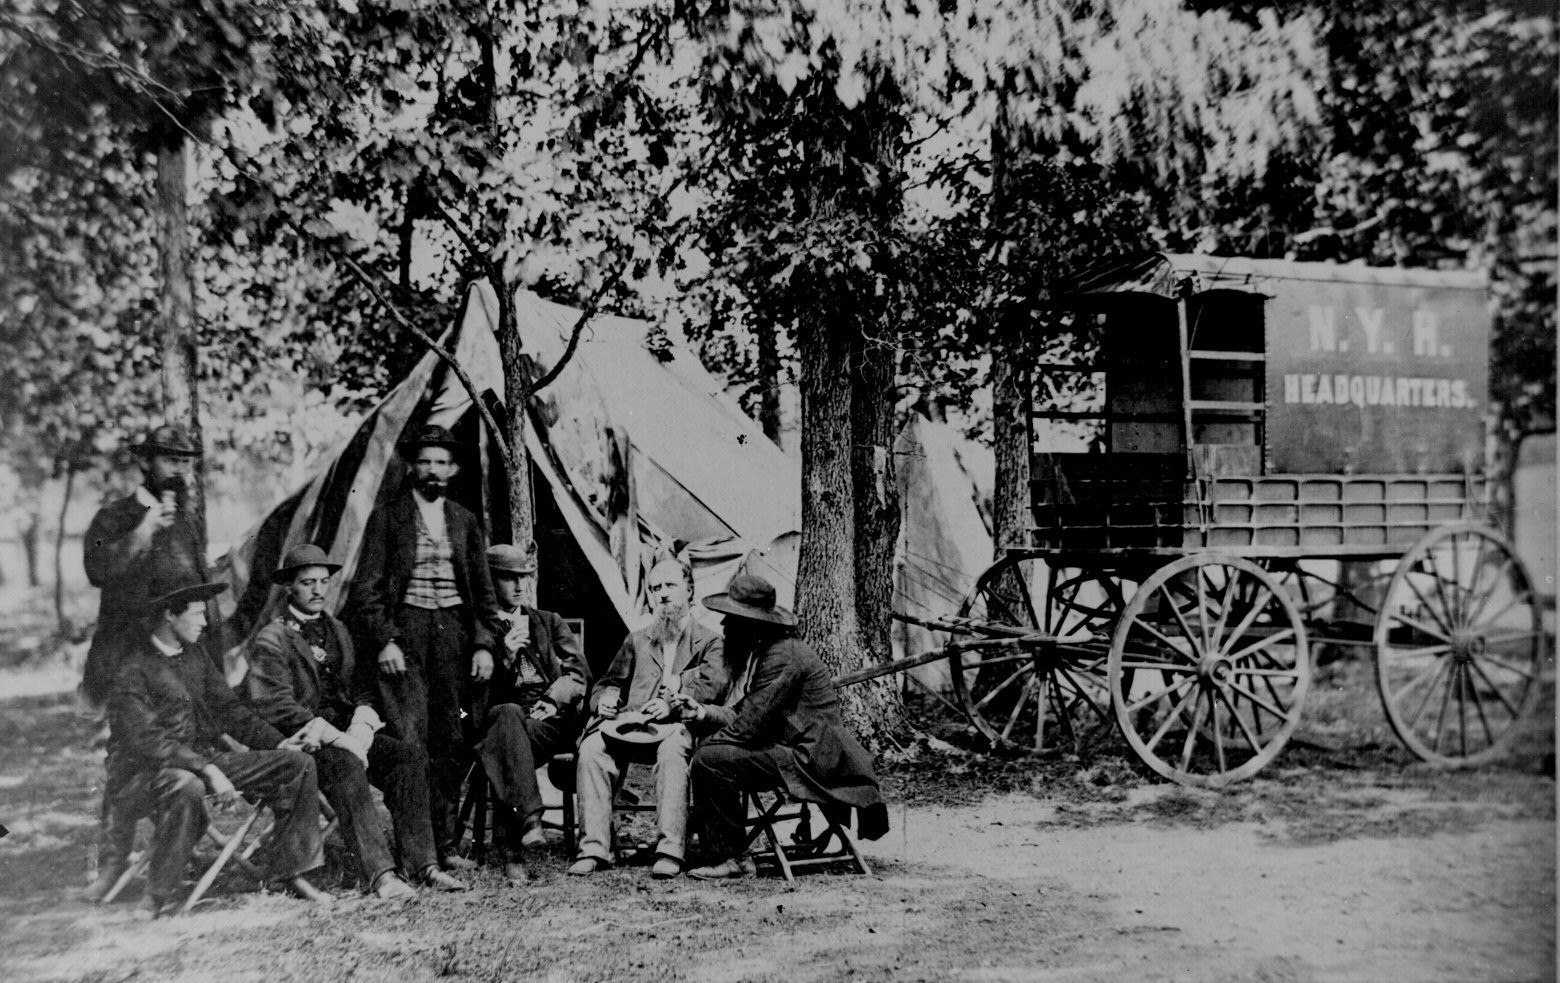 Civil War correspondents were on the front lines of reporting on the conflict from 1861 to 1865.